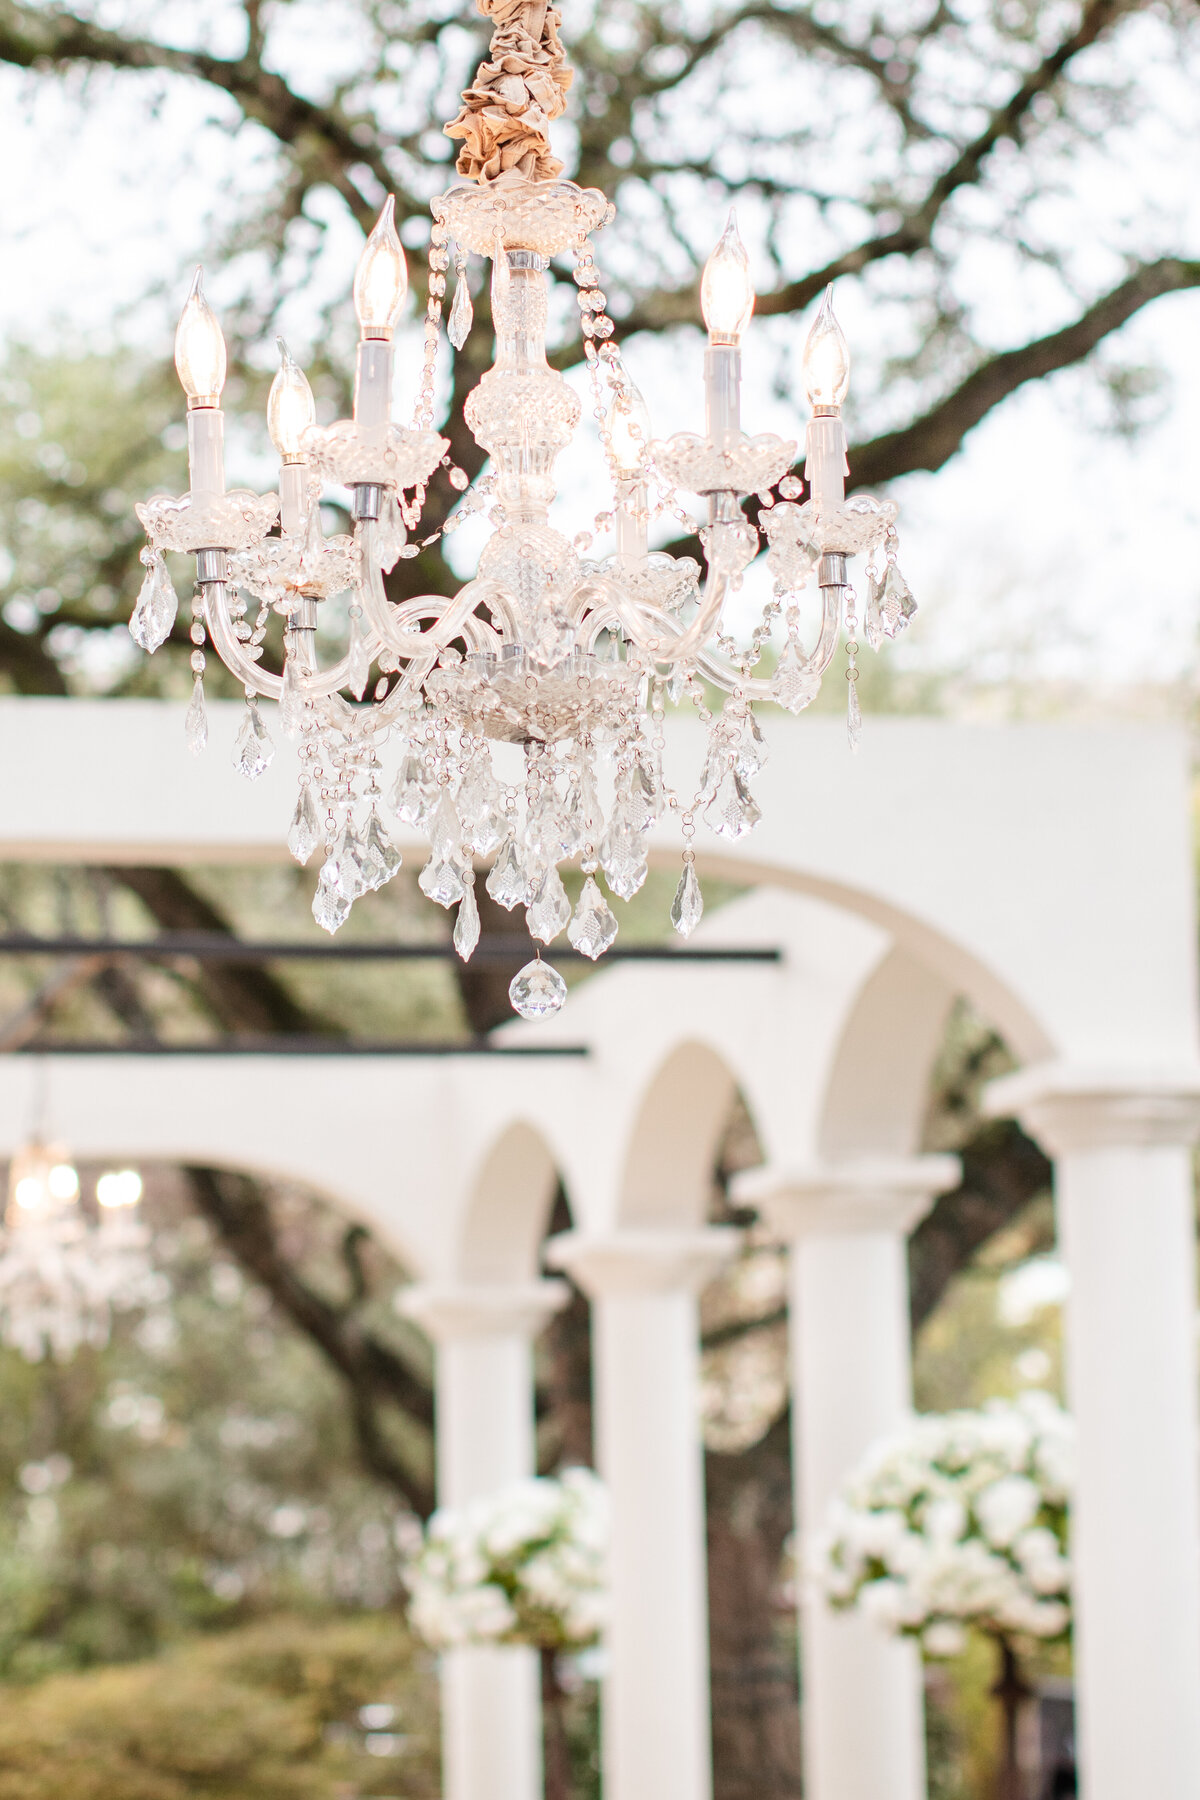 chandelier details at Gardens at West Green a Hill Country wedding venue by Firefly Photography